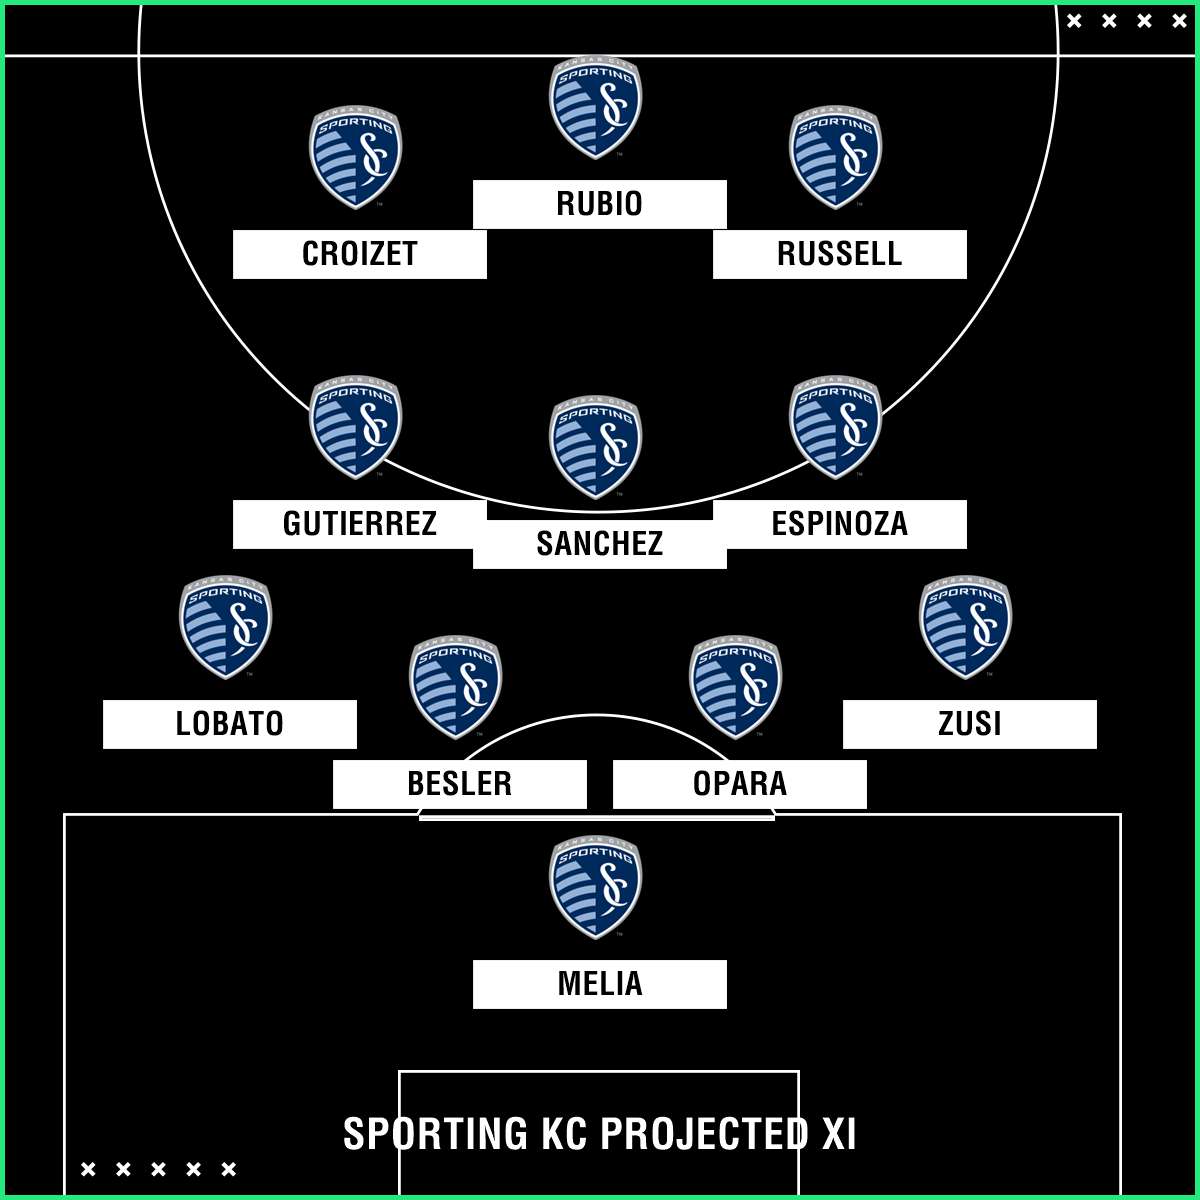 Sporting KC projected XI